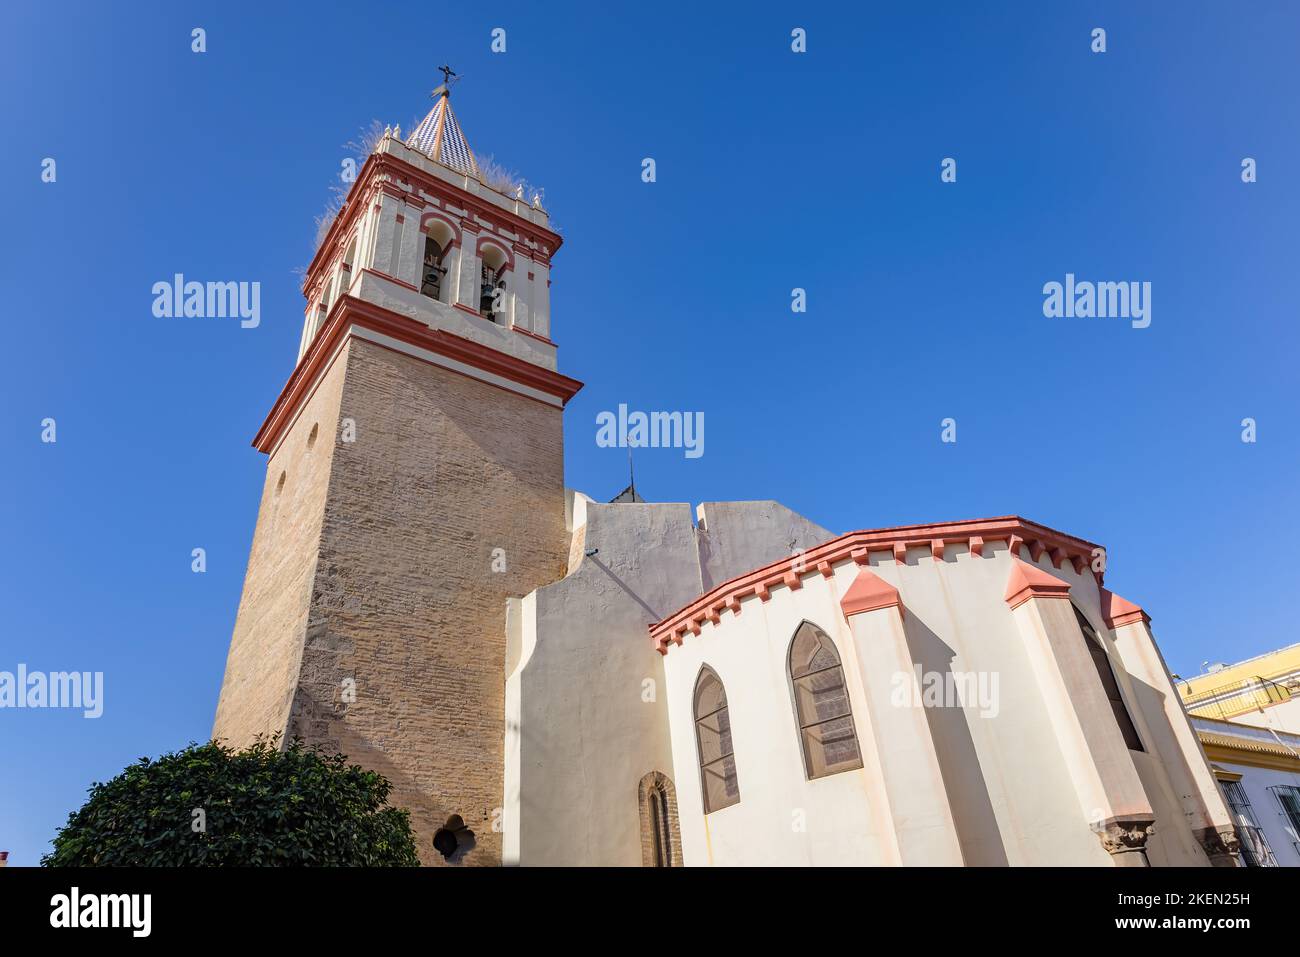 Facade of San Gil church, in Seville, Andalusia, Spain Stock Photo